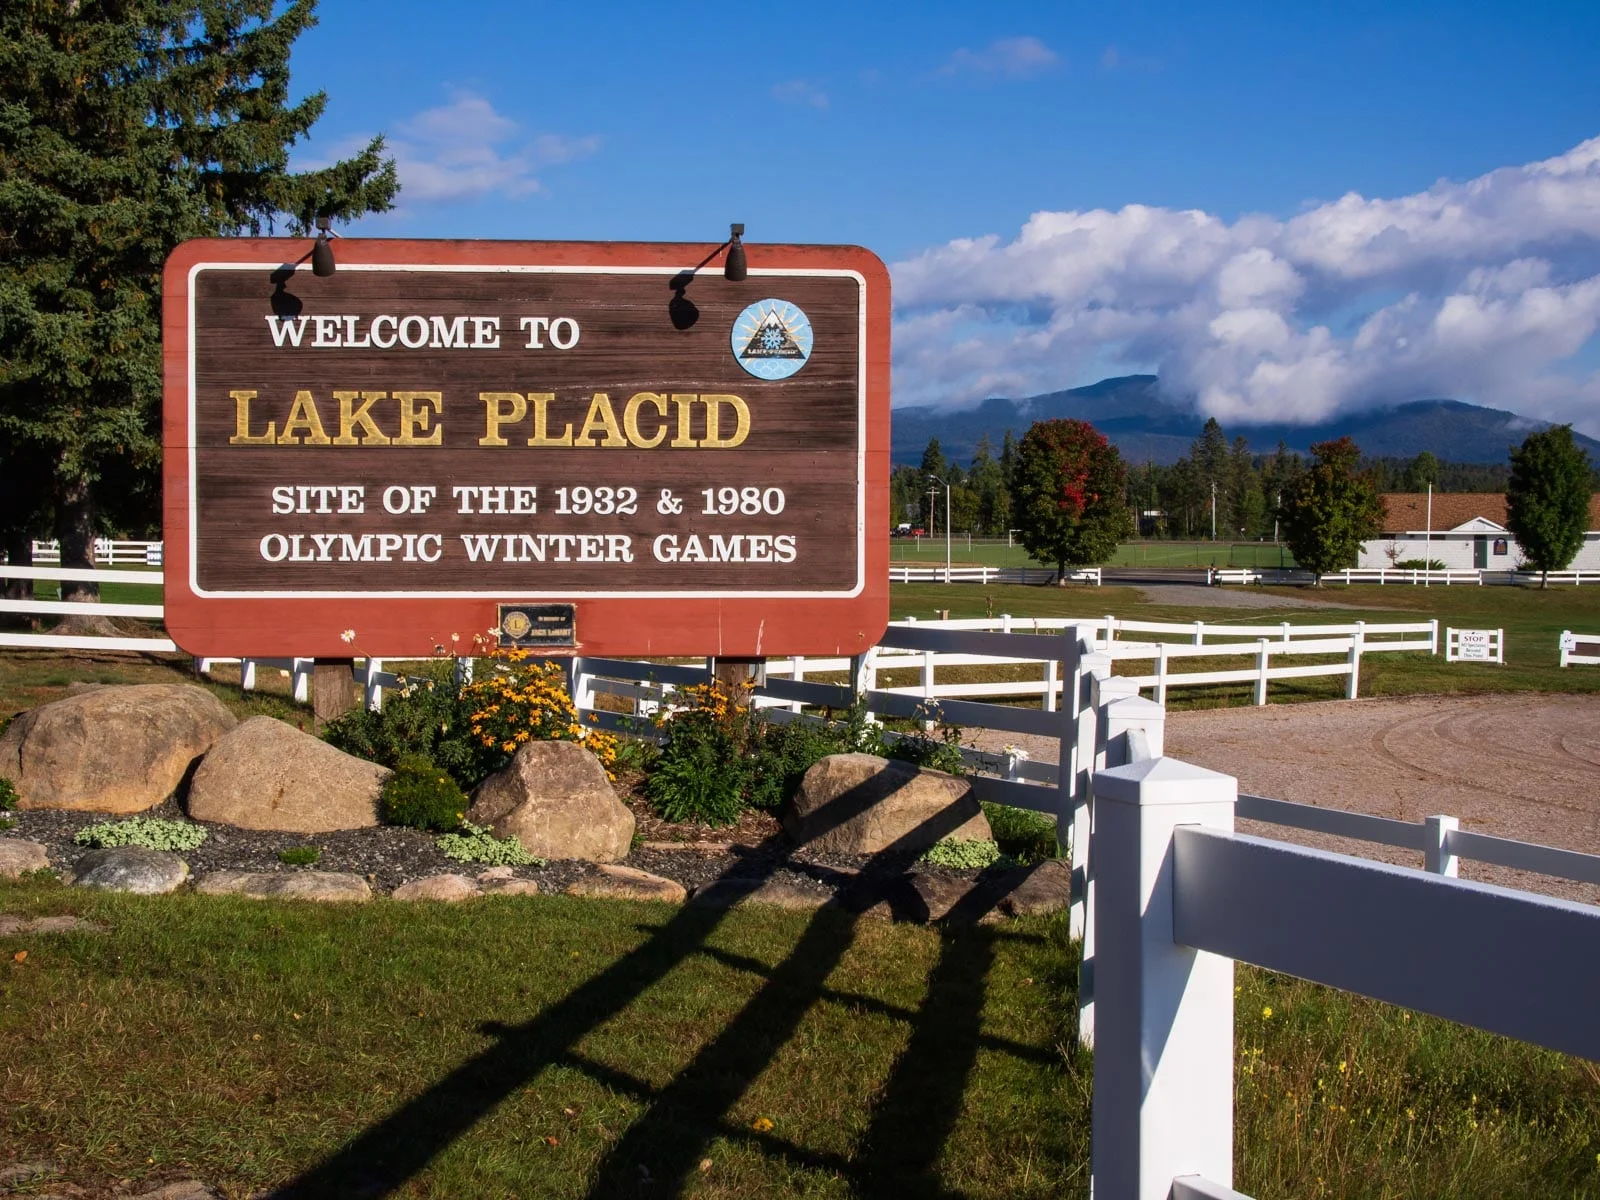 Welcome to lake placid olympic winter games.